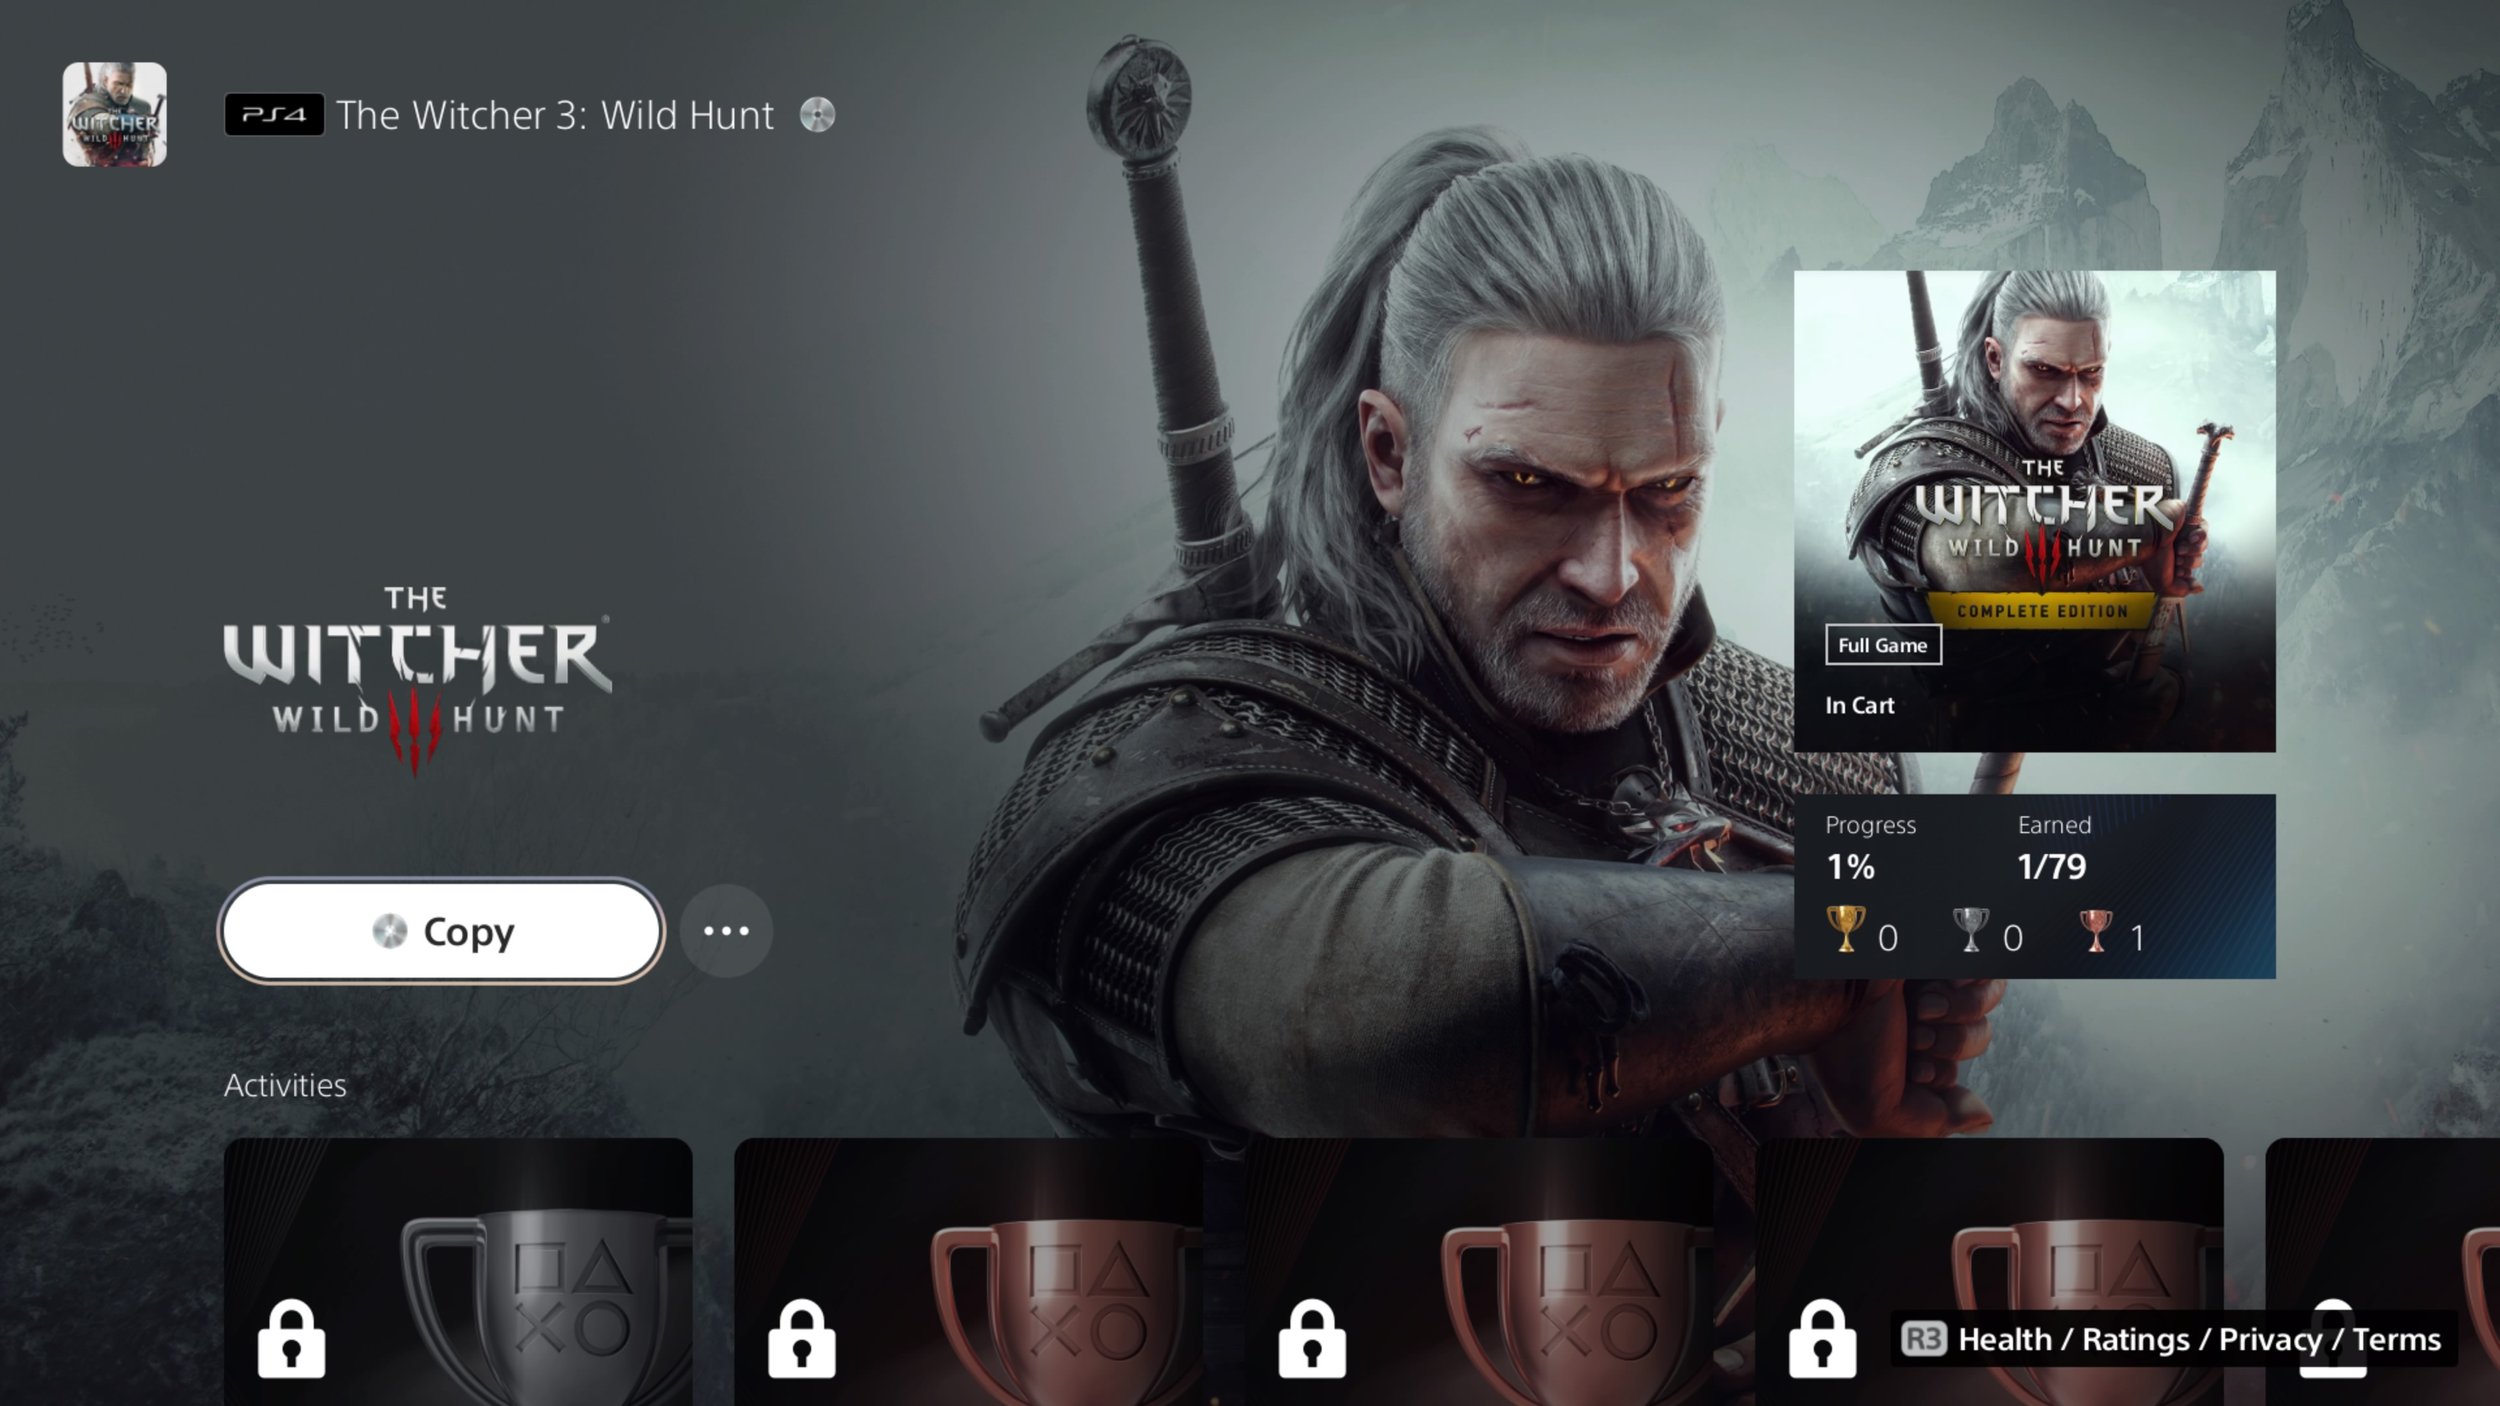 Can Xbox Series S still deliver a next-gen Witcher 3 experience?